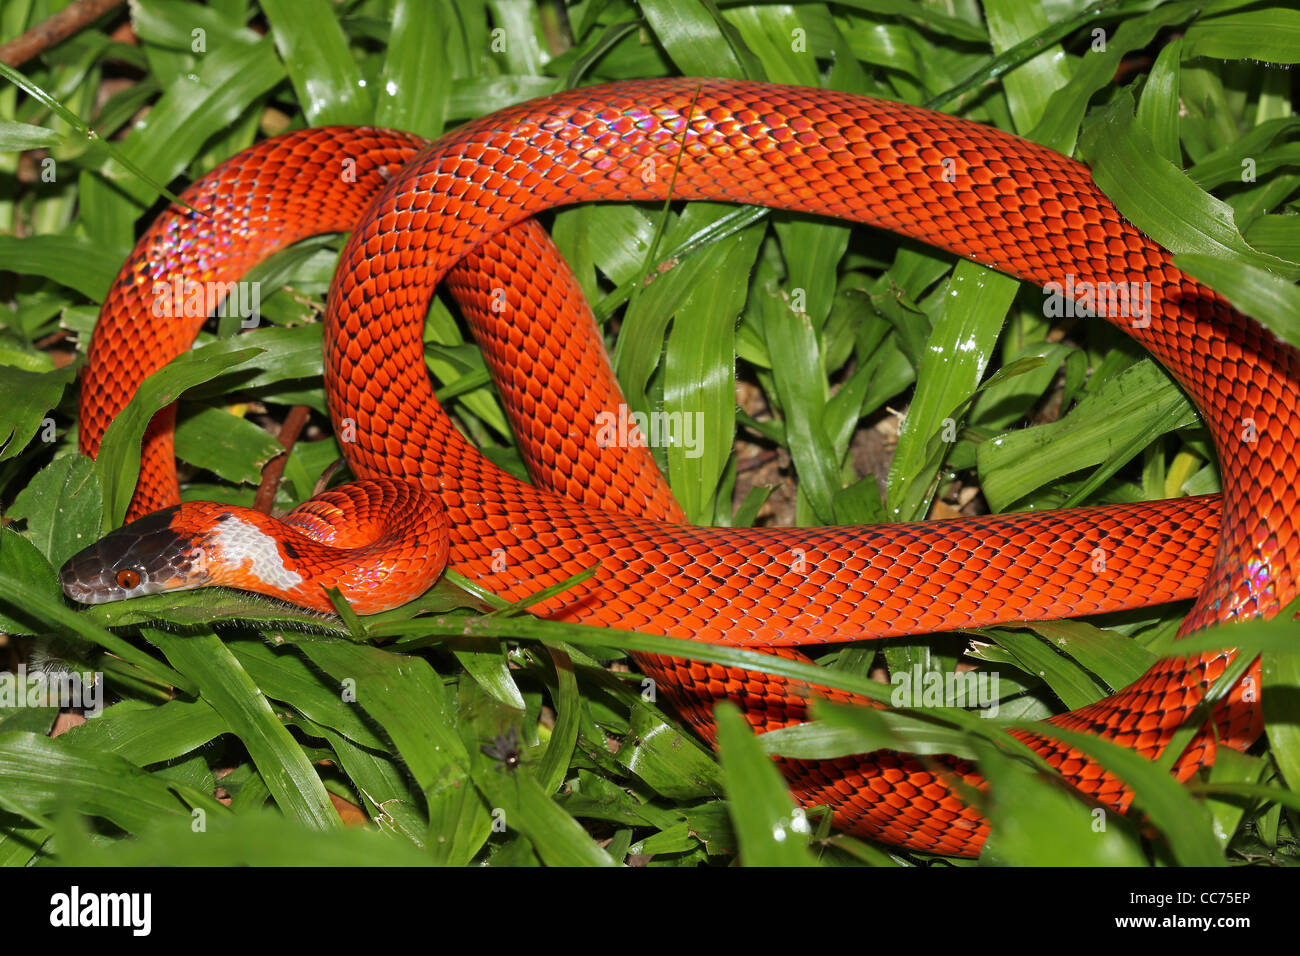 A Vibrant False Coral Snake (Oxyrhopus sp.) in the Peruvian Amazon Stock Photo